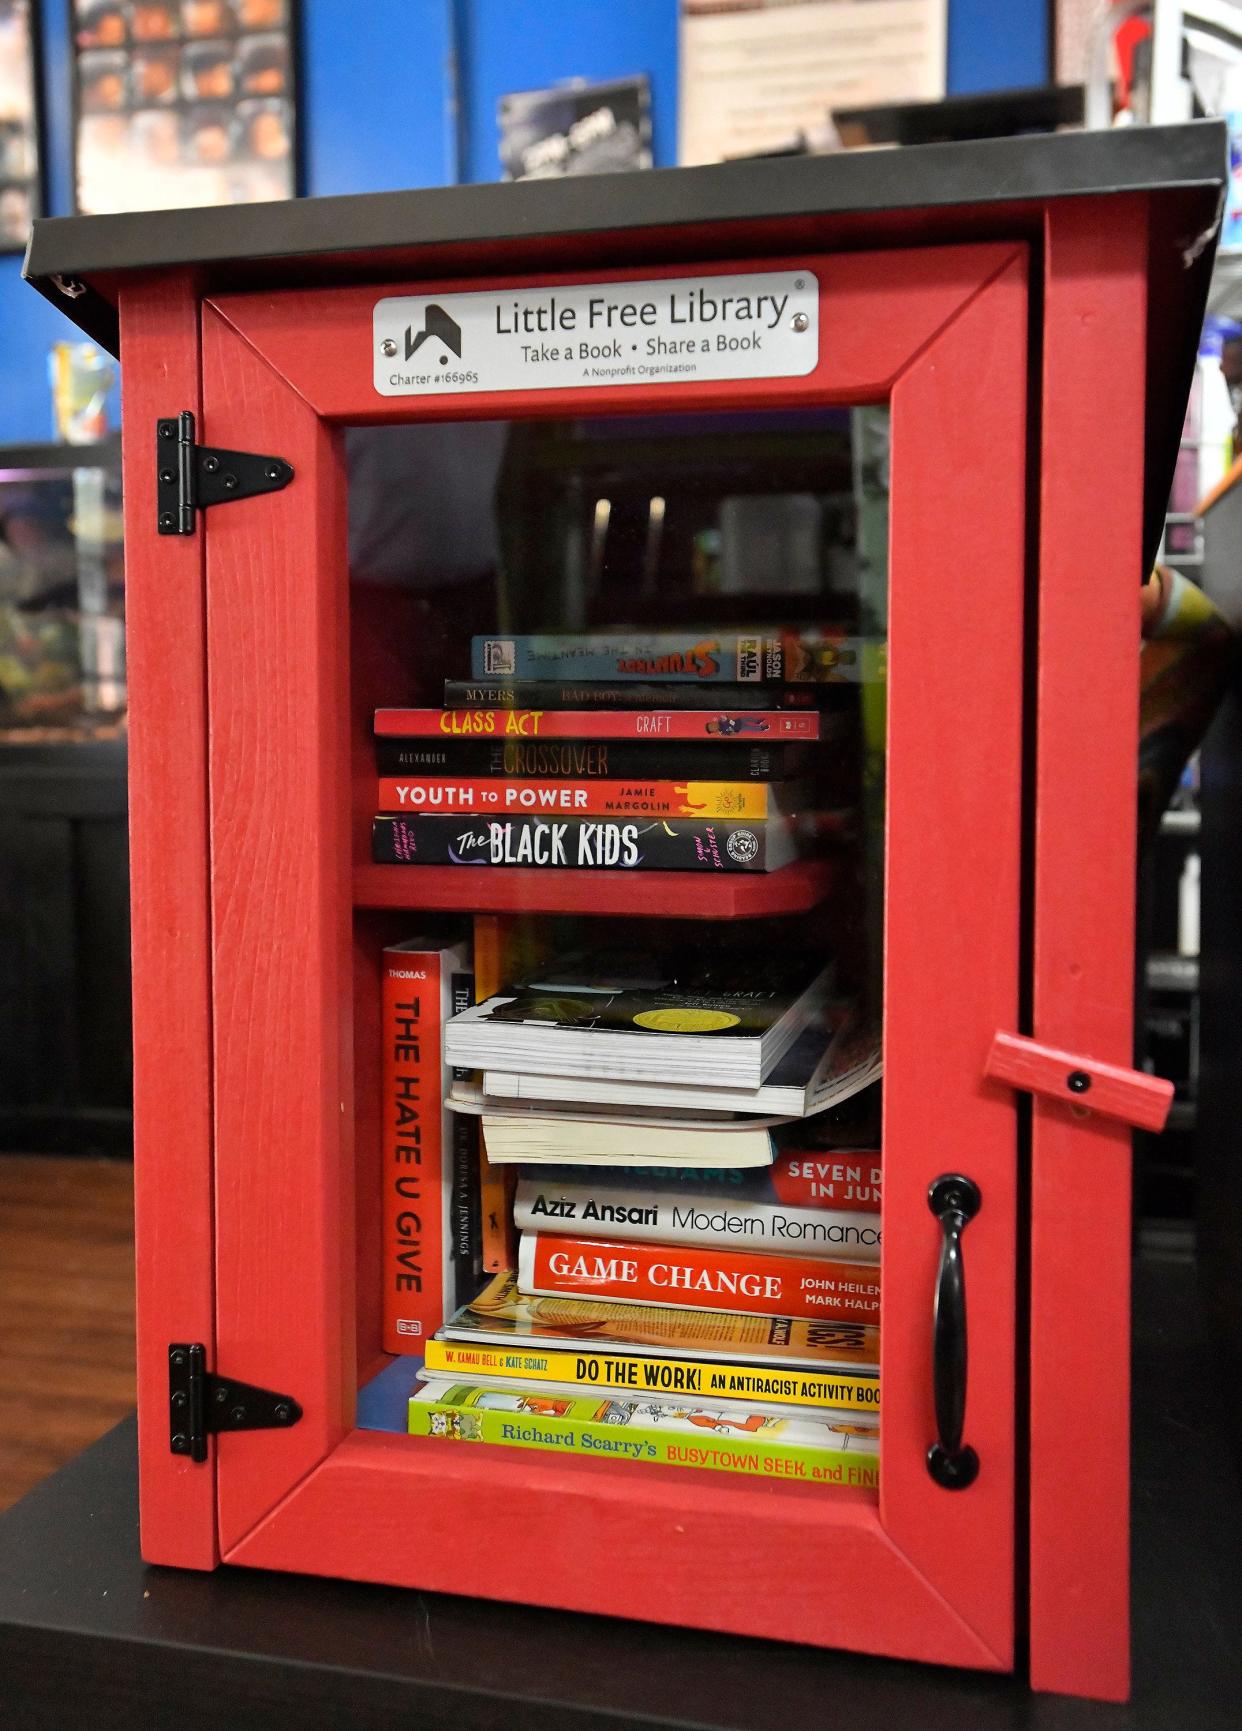 The Little Free Library box inside Cutz-Linez & Trimz barber shop on Moncrief Road showcases books from diverse authors, making them available at no charge. The box is the first outlet for the Unbanned Book Club, a Jacksonville-centered project to circulate books that have been banned or challenged at school systems.